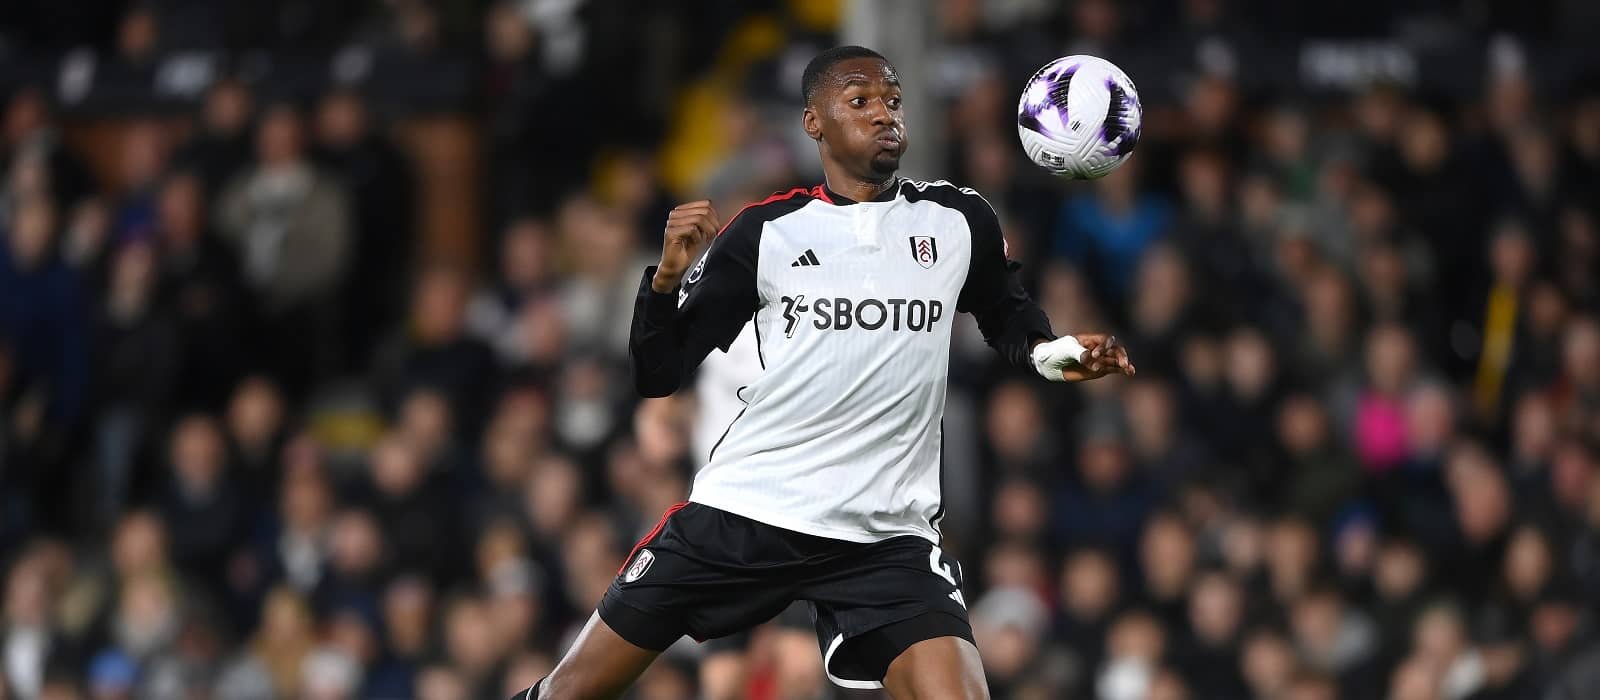 Man United target Tosin Adarabioyo has made ‘final’ decision to depart Fulham – Man United News And Transfer News